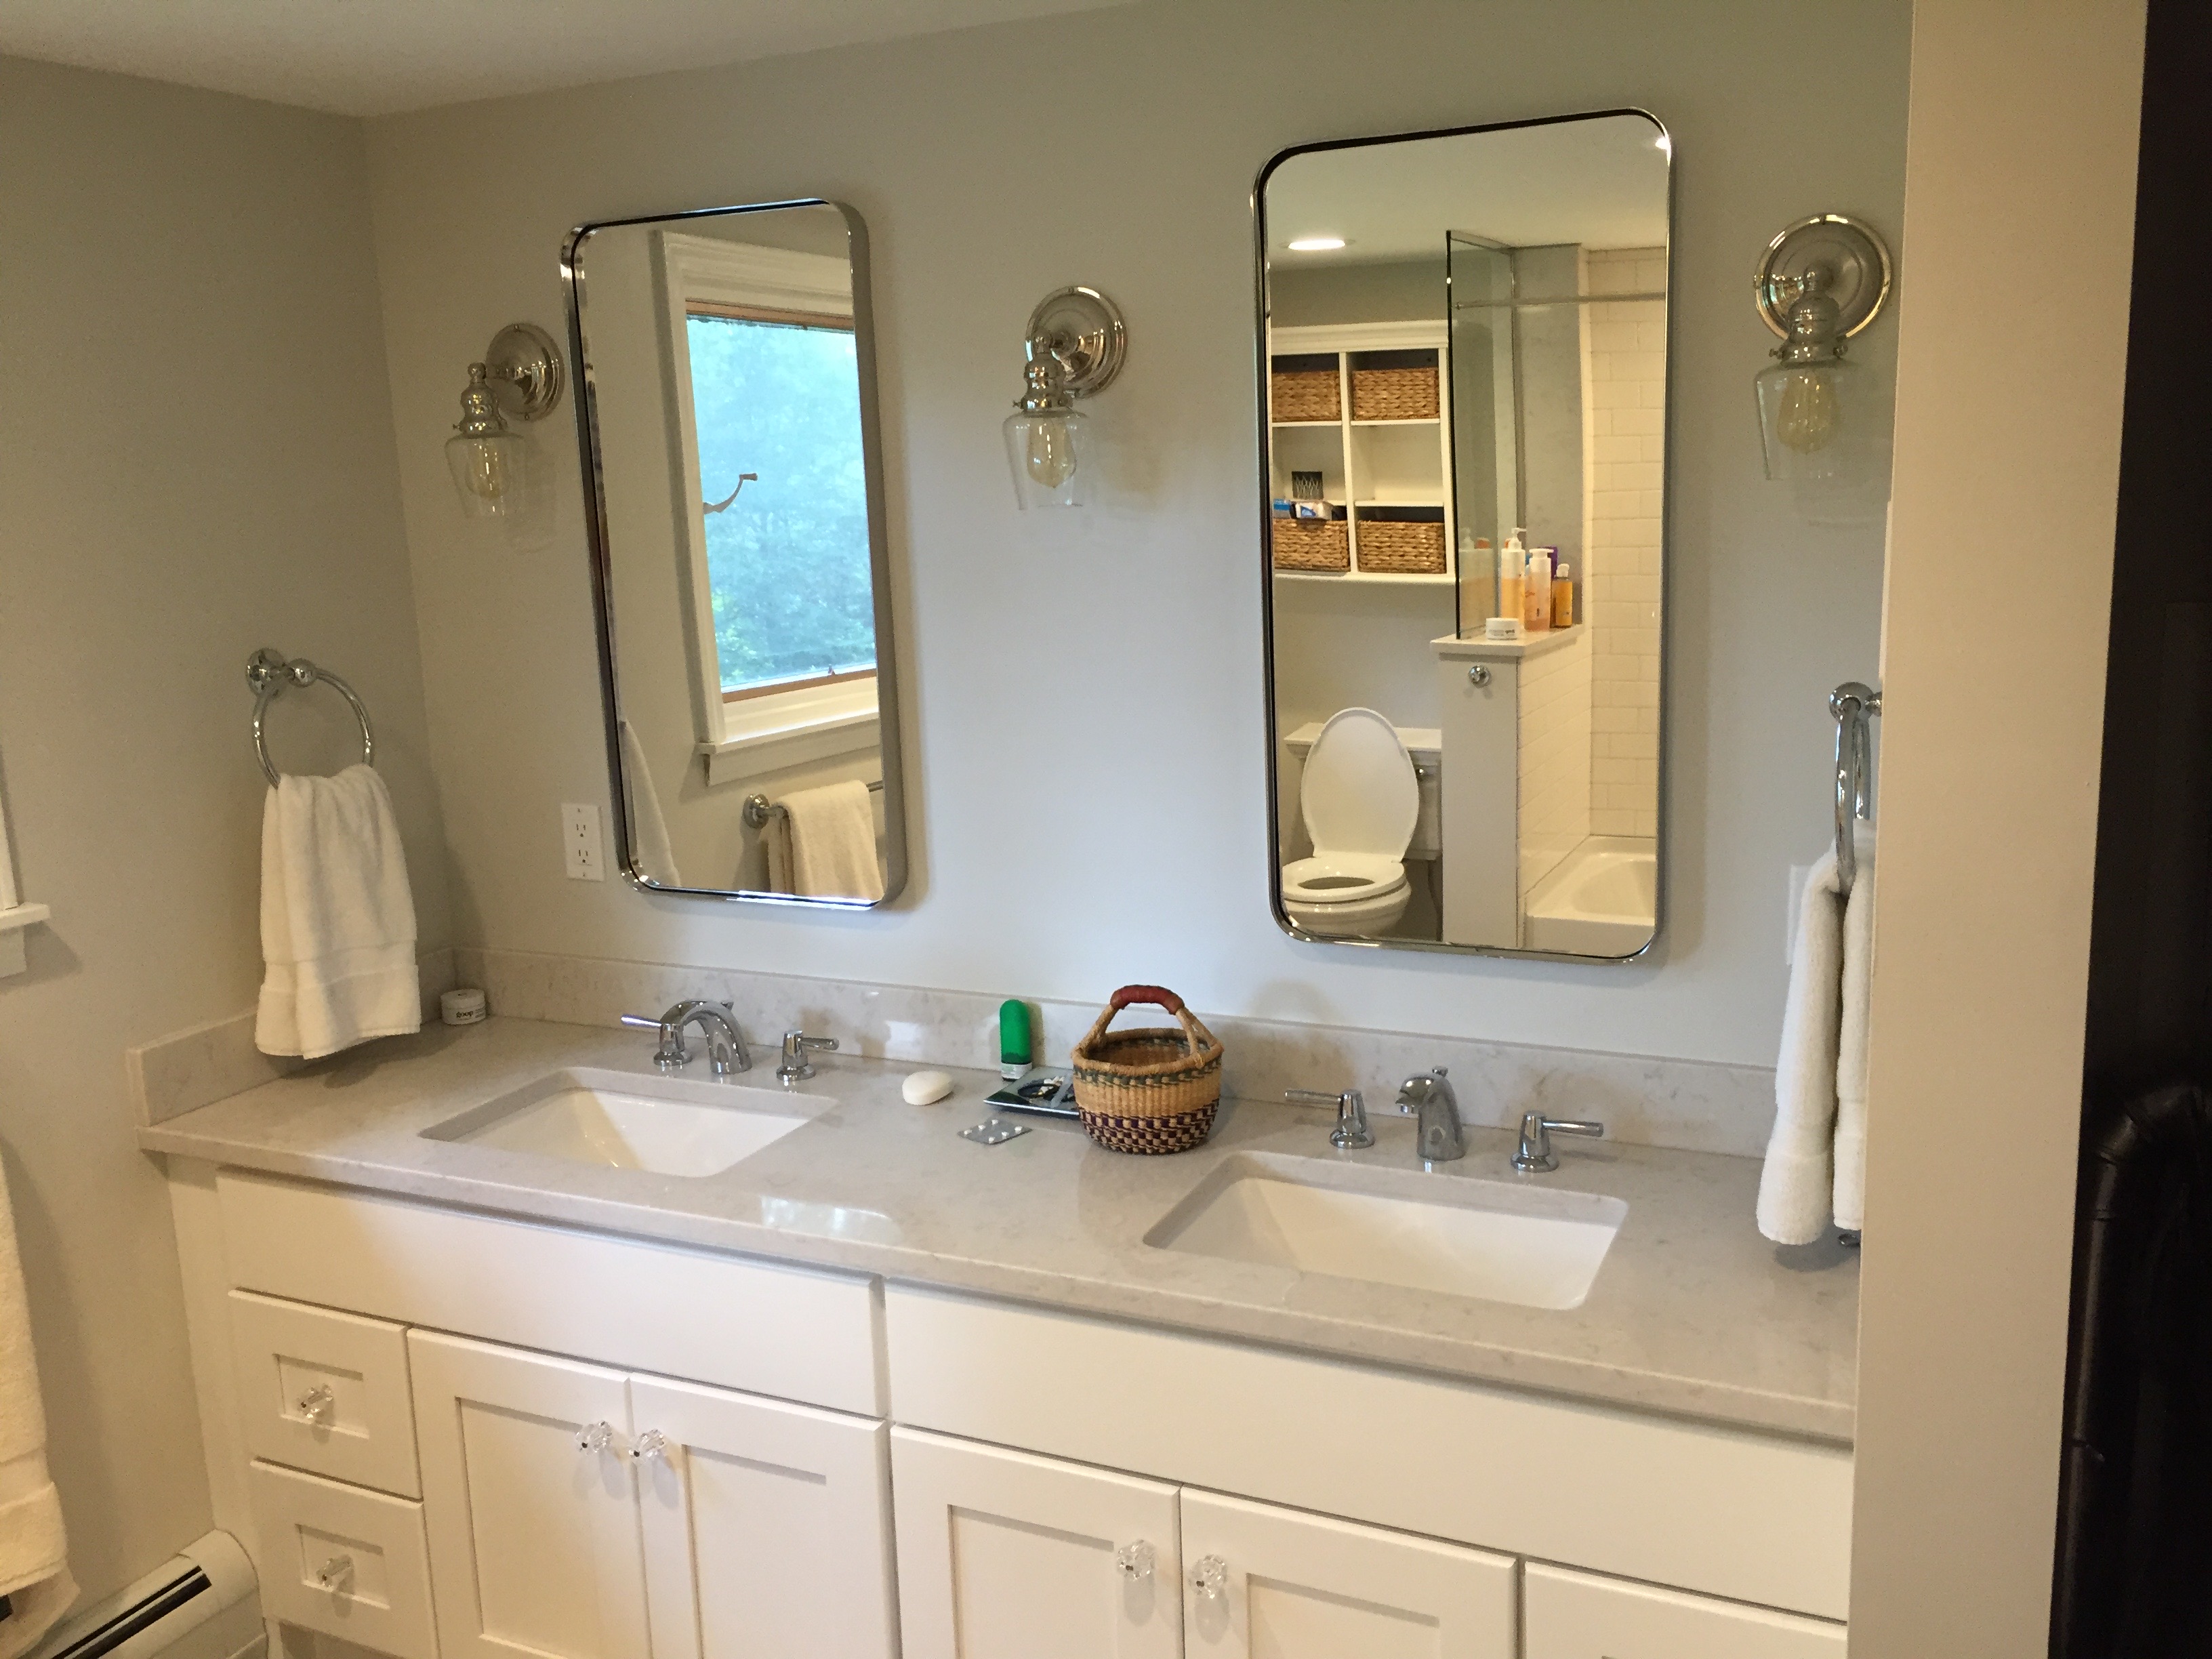 completed bathroom remodeling project in central vermont by allied contractors